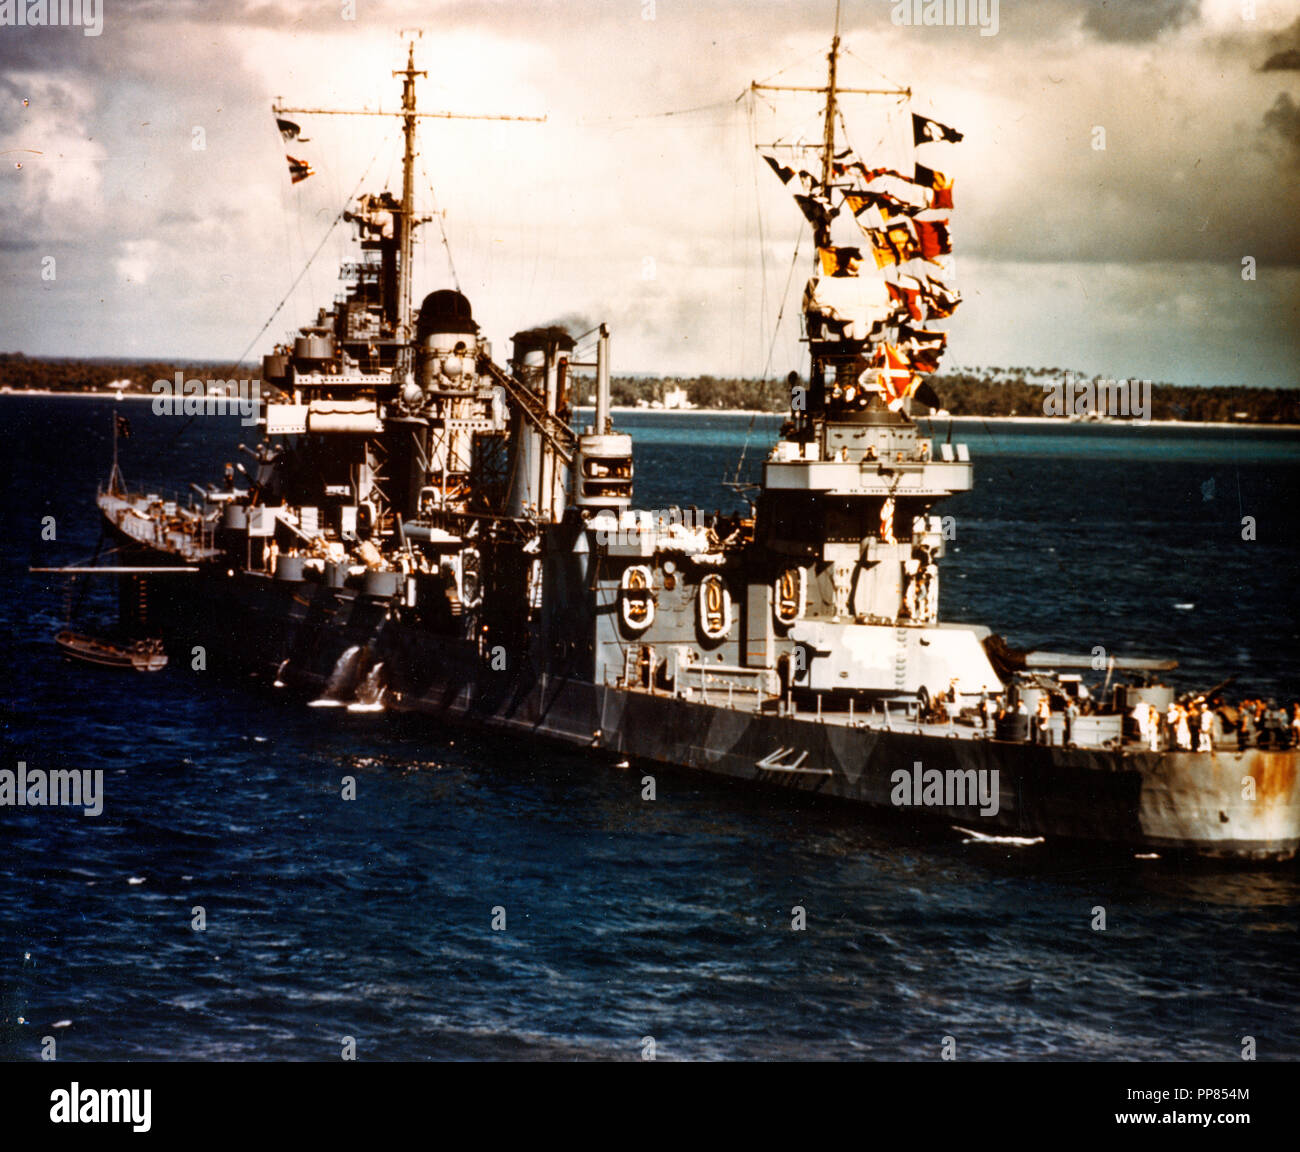 USS Quincy (CA-39) Photographed from USS Wasp (CV-7), at Noumea, New Caledonia, on the eve of the invasion of Guadalcanal, 3 August 1942. She was sunk six days later, during the Battle of Savo Island. Note Quincy's signal flags and Measure 12, Modified, camouflage scheme. Stock Photo